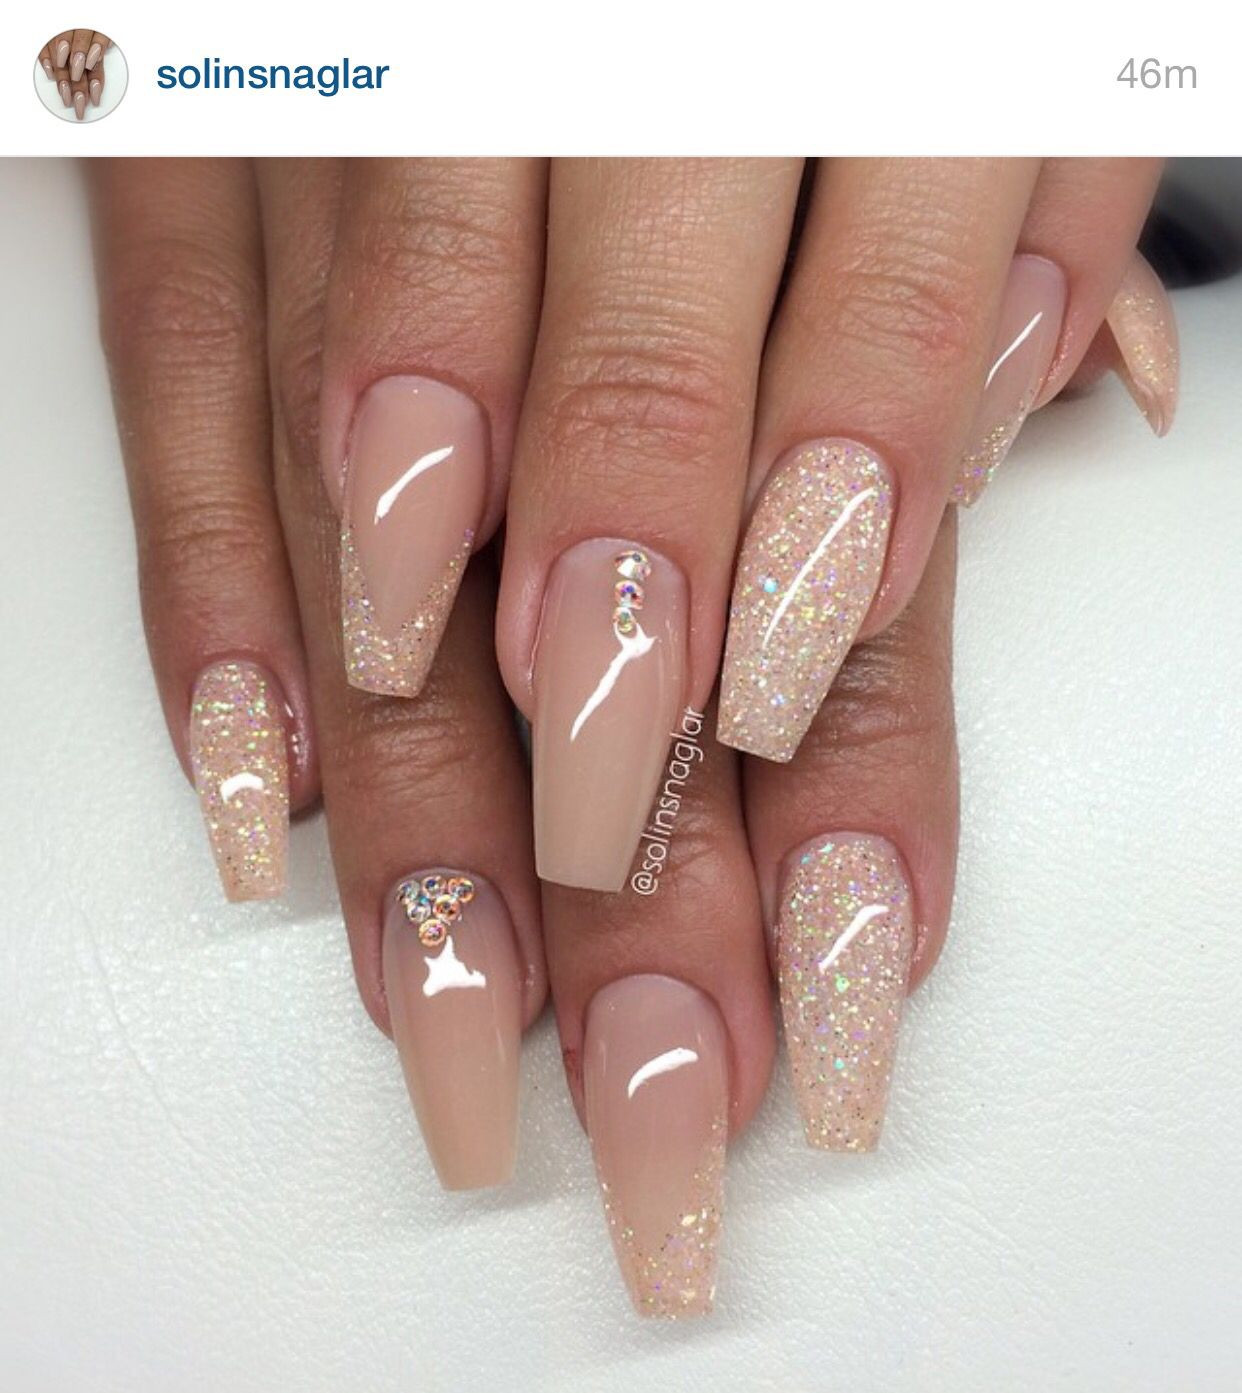 Nude And Glitter Nails
 Top 100 Most Creative Acrylic Nail Art Designs and